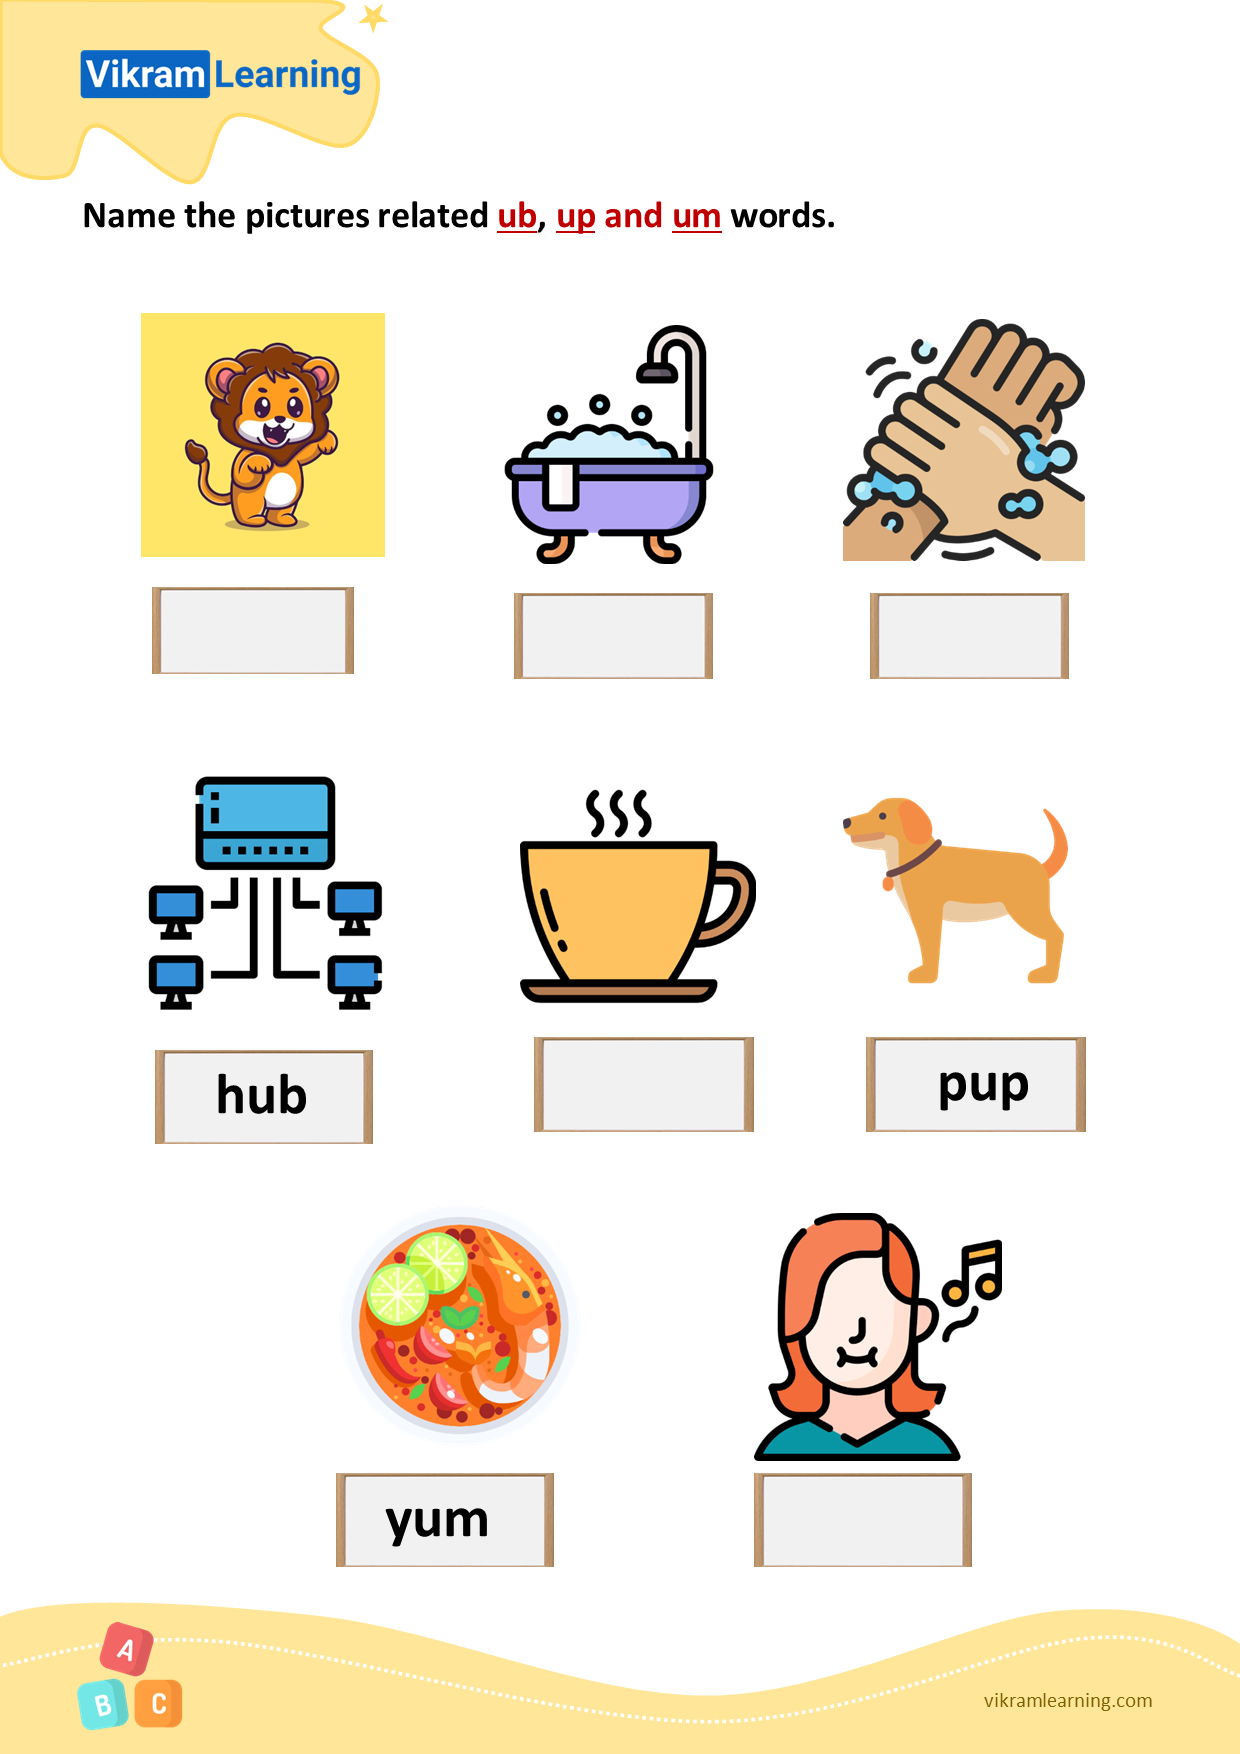 download-name-the-pictures-related-ub-up-and-um-words-worksheets-vikramlearning